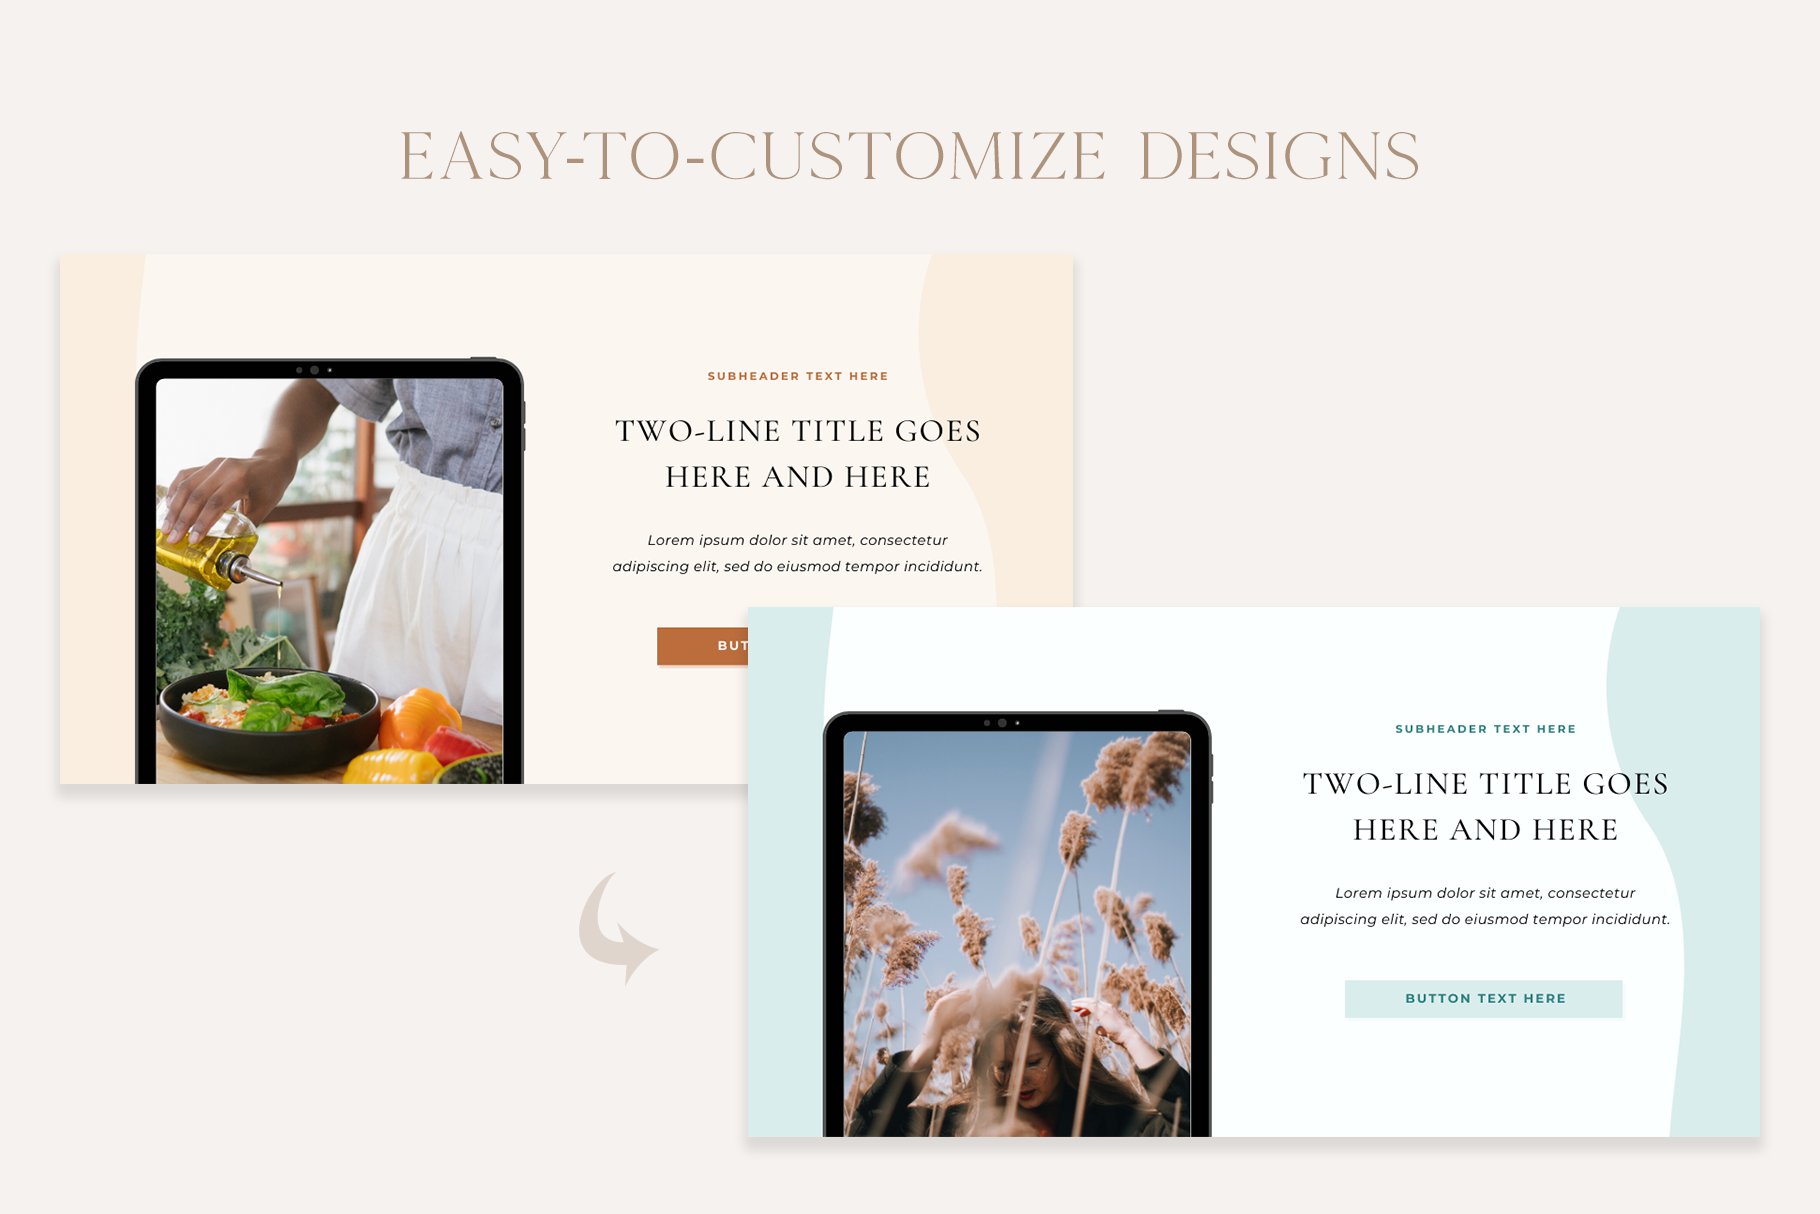 You can easy customize these templates.